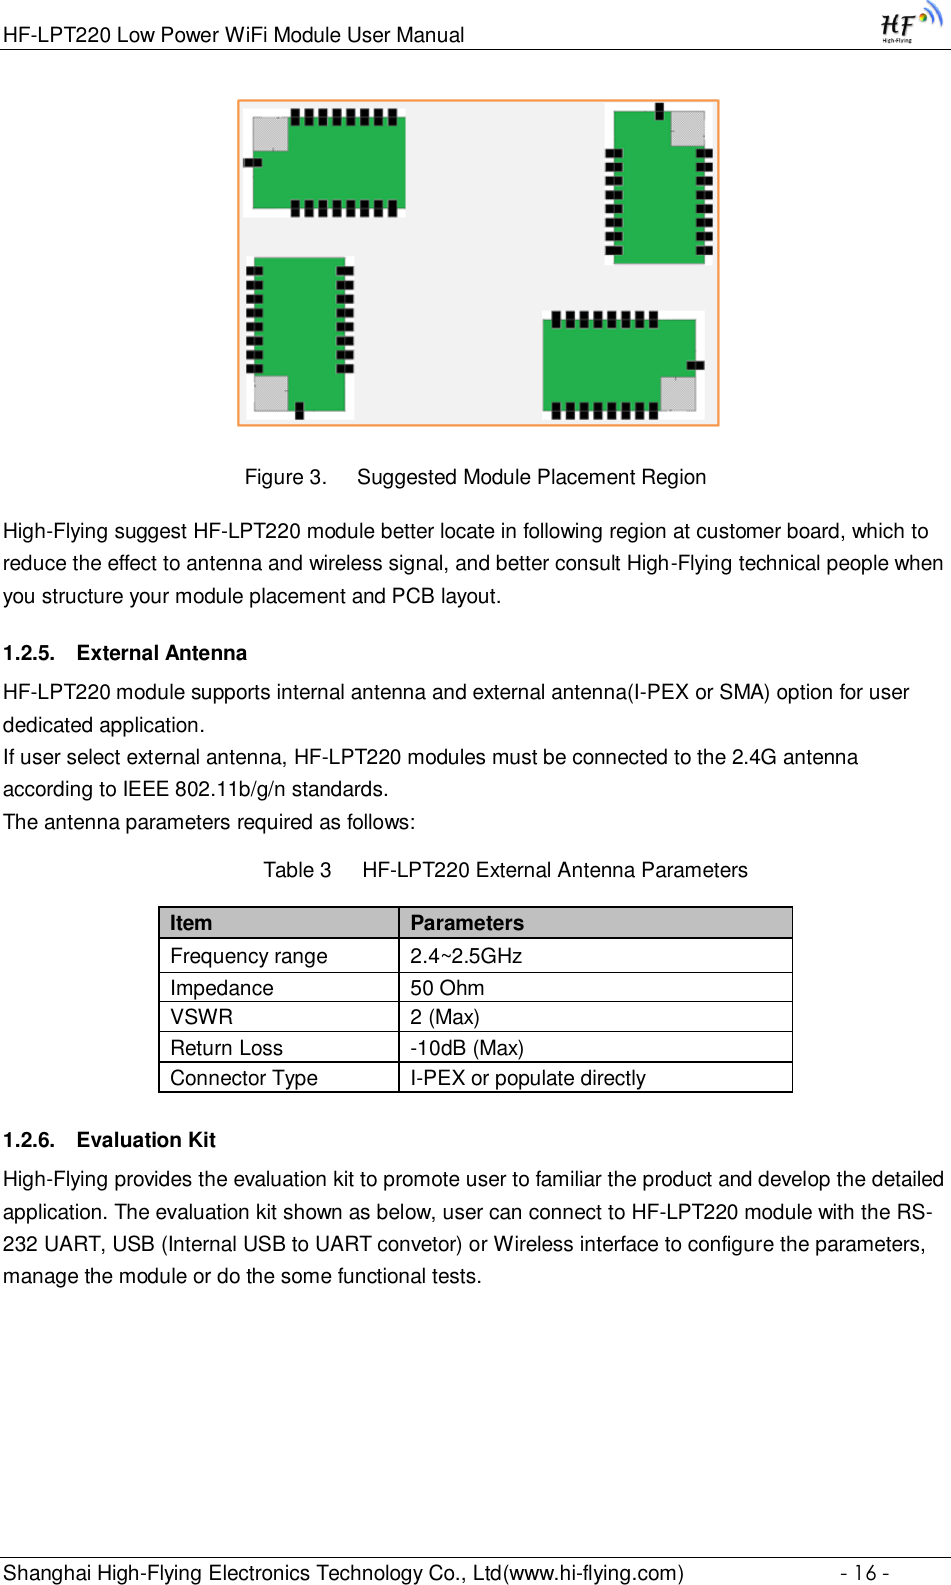 HF-LPT220 Low Power WiFi Module User Manual Shanghai High-Flying Electronics Technology Co., Ltd(www.hi-flying.com)  - 16 -                                Figure 3. Suggested Module Placement Region High-Flying suggest HF-LPT220 module better locate in following region at customer board, which to reduce the effect to antenna and wireless signal, and better consult High-Flying technical people when you structure your module placement and PCB layout.  1.2.5. External Antenna HF-LPT220 module supports internal antenna and external antenna(I-PEX or SMA) option for user dedicated application.  If user select external antenna, HF-LPT220 modules must be connected to the 2.4G antenna according to IEEE 802.11b/g/n standards.  The antenna parameters required as follows: Table 3     HF-LPT220 External Antenna Parameters  1.2.6. Evaluation Kit High-Flying provides the evaluation kit to promote user to familiar the product and develop the detailed application. The evaluation kit shown as below, user can connect to HF-LPT220 module with the RS-232 UART, USB (Internal USB to UART convetor) or Wireless interface to configure the parameters, manage the module or do the some functional tests. Item Parameters Frequency range 2.4~2.5GHz Impedance 50 Ohm VSWR 2 (Max) Return Loss -10dB (Max) Connector Type I-PEX or populate directly 